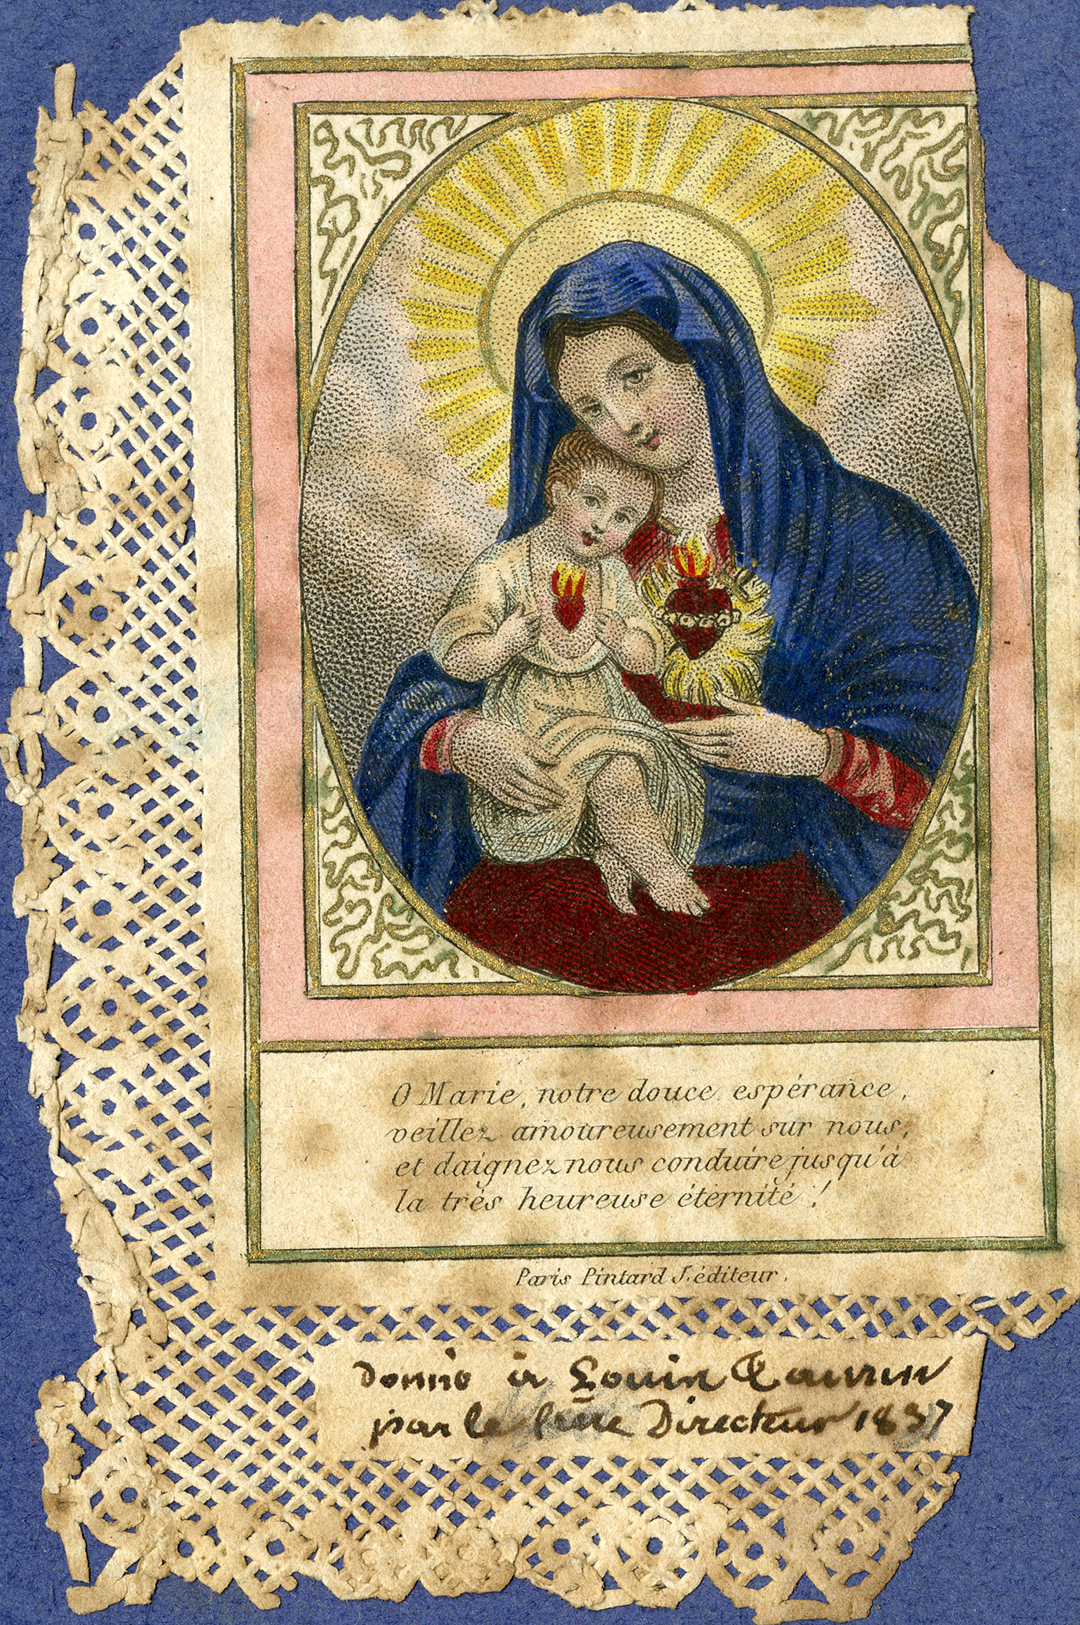 In this 1837 holy card with a lace border, the Blessed Virgin Mary, depicted with the Immaculate Heart, cradles the infant Jesus, depicted with the Sacred Heart. It contains a printed passage and a handwritten message, both in French. 